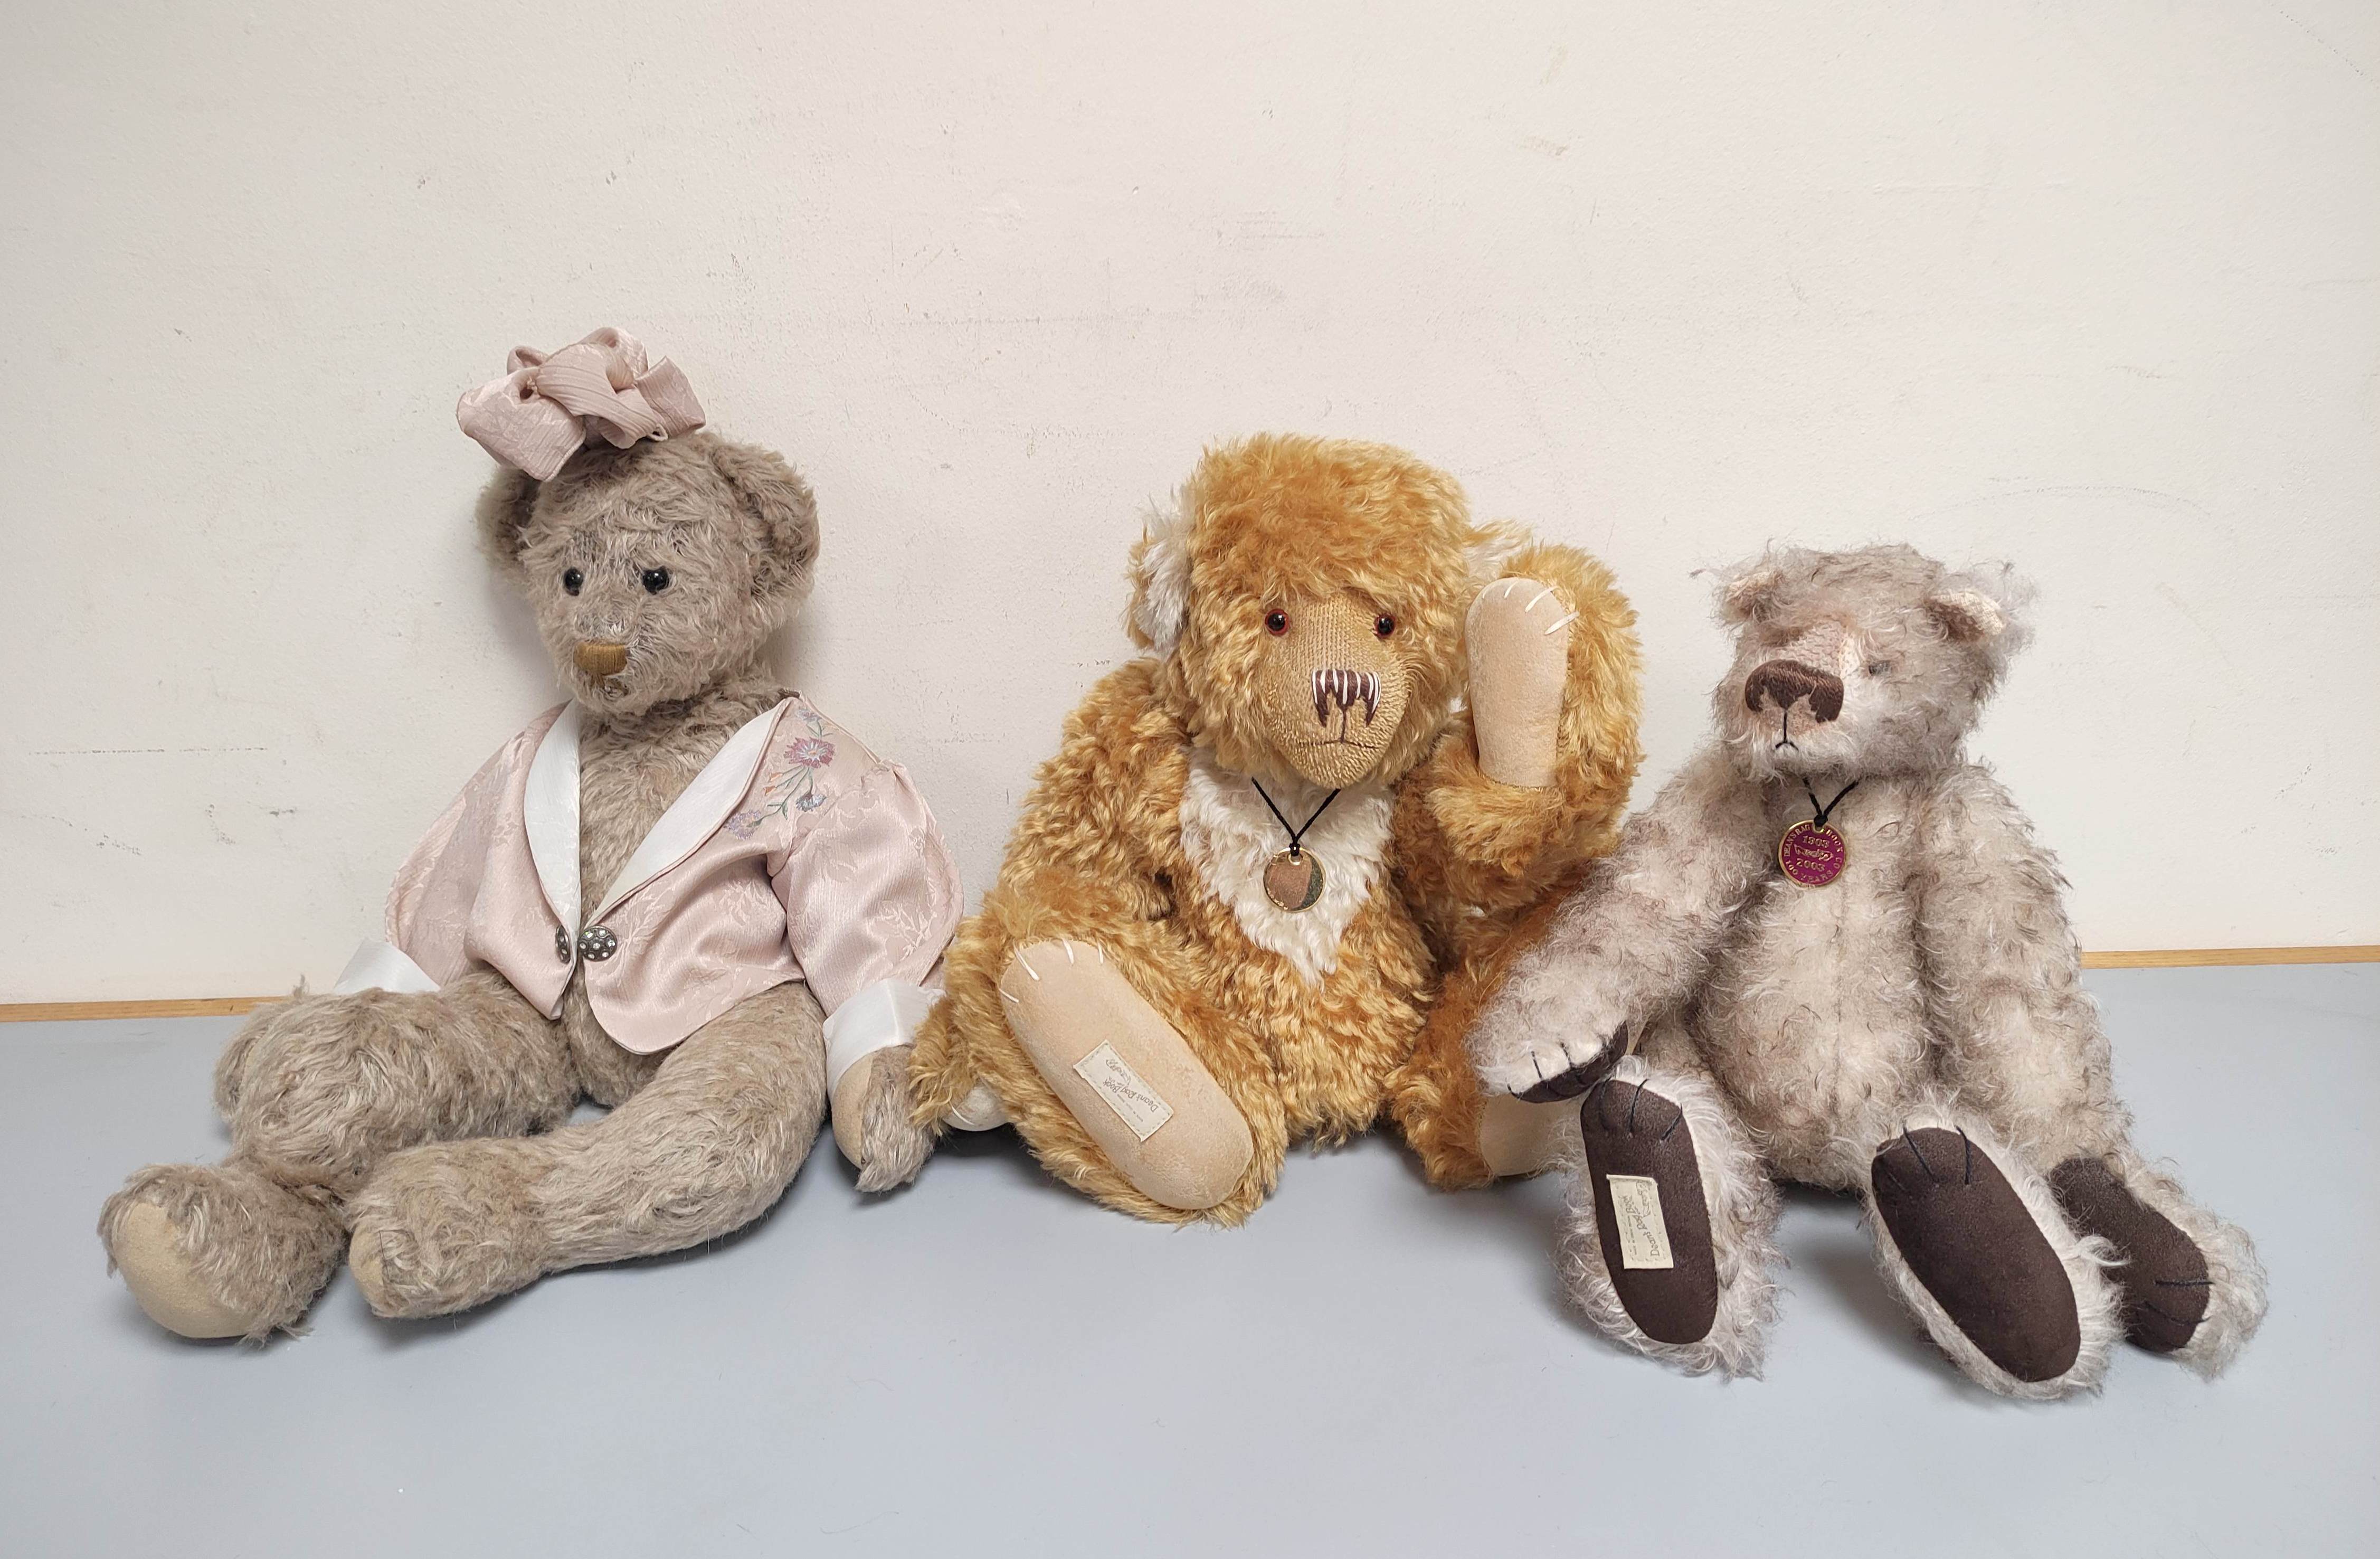 Three collector's teddy bears to include Gund Barton's Creek Collection Angela bear 86026,& two